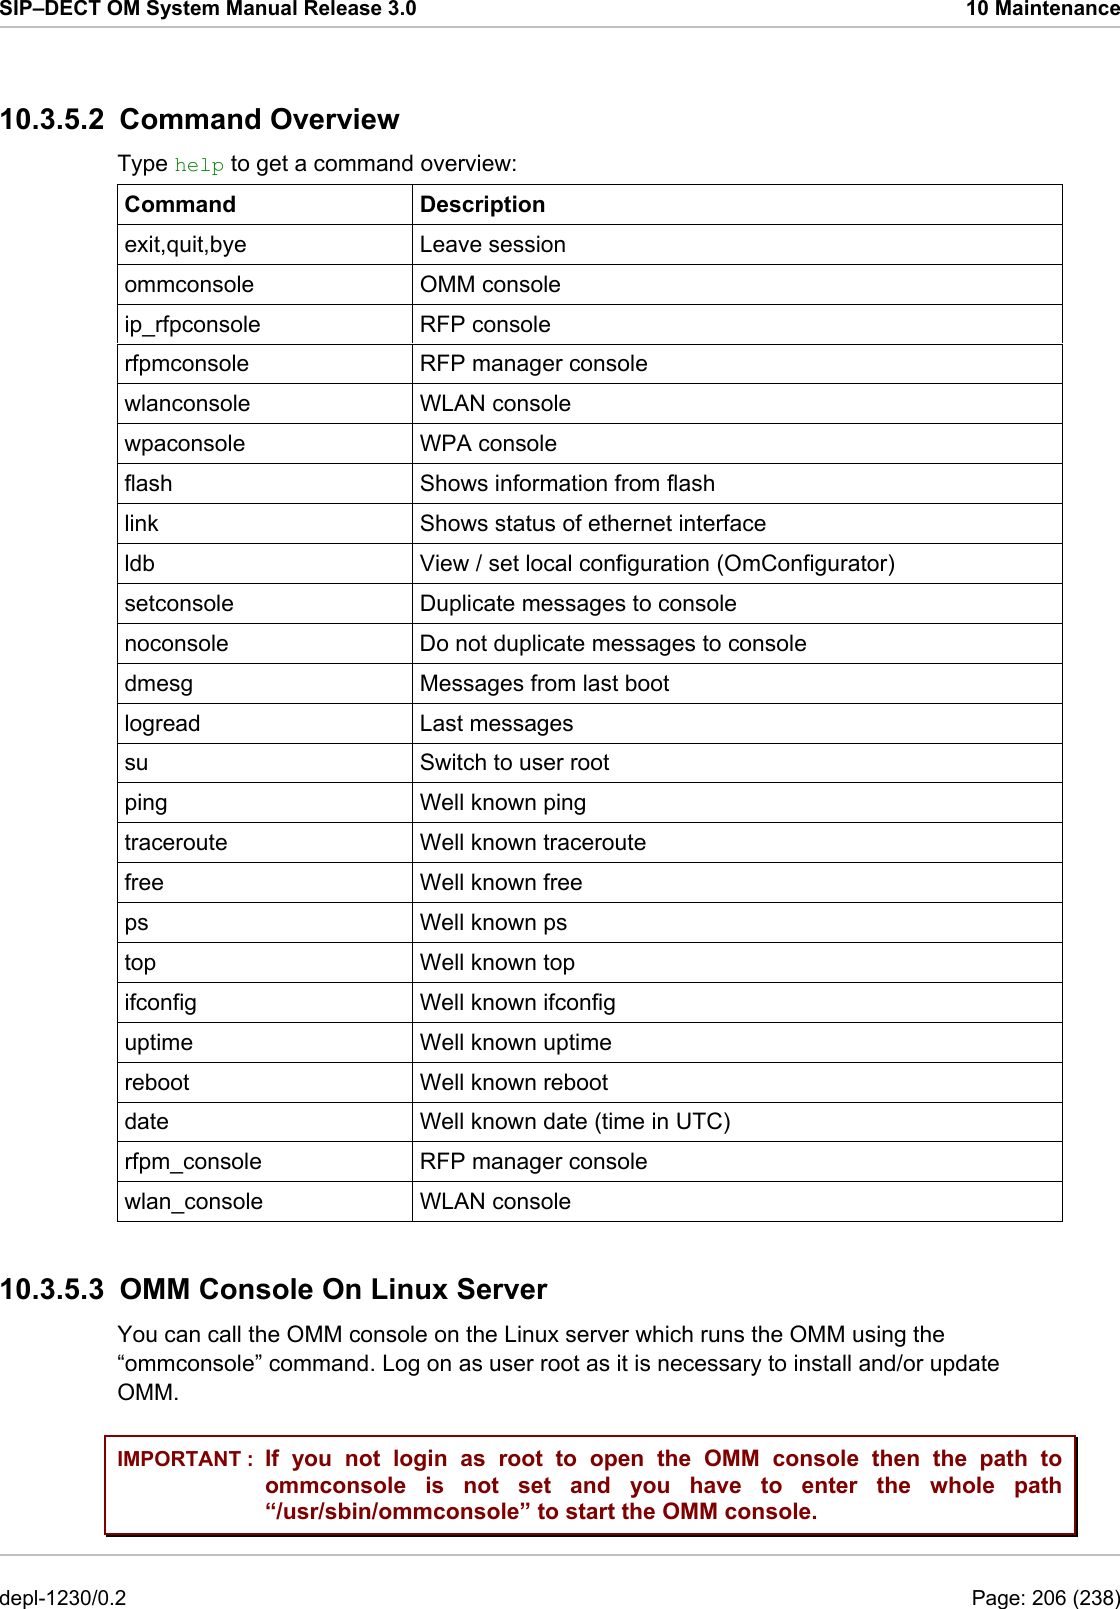 SIP–DECT OM System Manual Release 3.0  10 Maintenance 10.3.5.2 Command Overview Type help to get a command overview: Command Description exit,quit,bye Leave session ommconsole OMM console ip_rfpconsole RFP console rfpmconsole  RFP manager console wlanconsole WLAN console wpaconsole WPA console flash  Shows information from flash link  Shows status of ethernet interface ldb  View / set local configuration (OmConfigurator) setconsole  Duplicate messages to console noconsole  Do not duplicate messages to console dmesg  Messages from last boot logread Last messages su  Switch to user root ping Well known ping traceroute Well known traceroute free Well known free ps Well known ps top Well known top ifconfig Well known ifconfig uptime Well known uptime reboot Well known reboot date  Well known date (time in UTC) rfpm_console  RFP manager console wlan_console WLAN console 10.3.5.3  OMM Console On Linux Server You can call the OMM console on the Linux server which runs the OMM using the “ommconsole” command. Log on as user root as it is necessary to install and/or update OMM. IMPORTANT :  If you not login as root to open the OMM console then the path to ommconsole is not set and you have to enter the whole path “/usr/sbin/ommconsole” to start the OMM console. depl-1230/0.2  Page: 206 (238) 